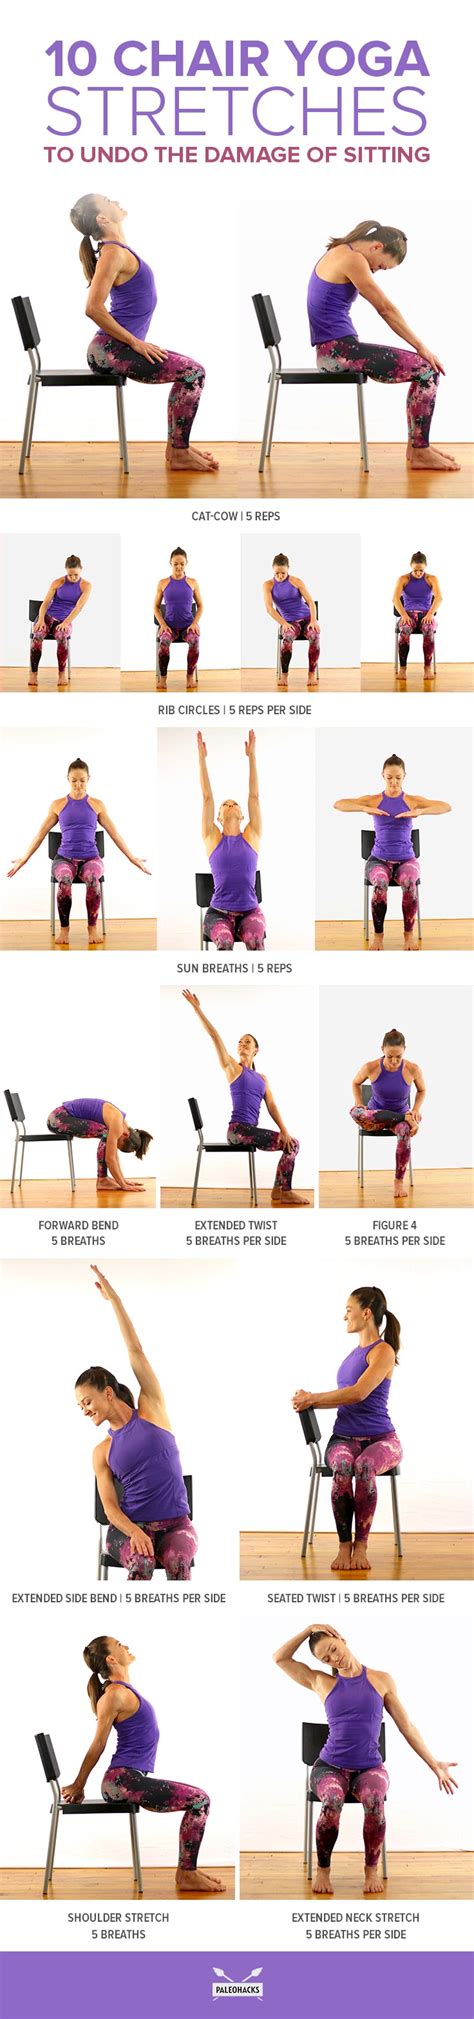 Yoga for sciatica pain and discomfort. 10 Chair Yoga Stretches To Undo The Damage of Sitting ...